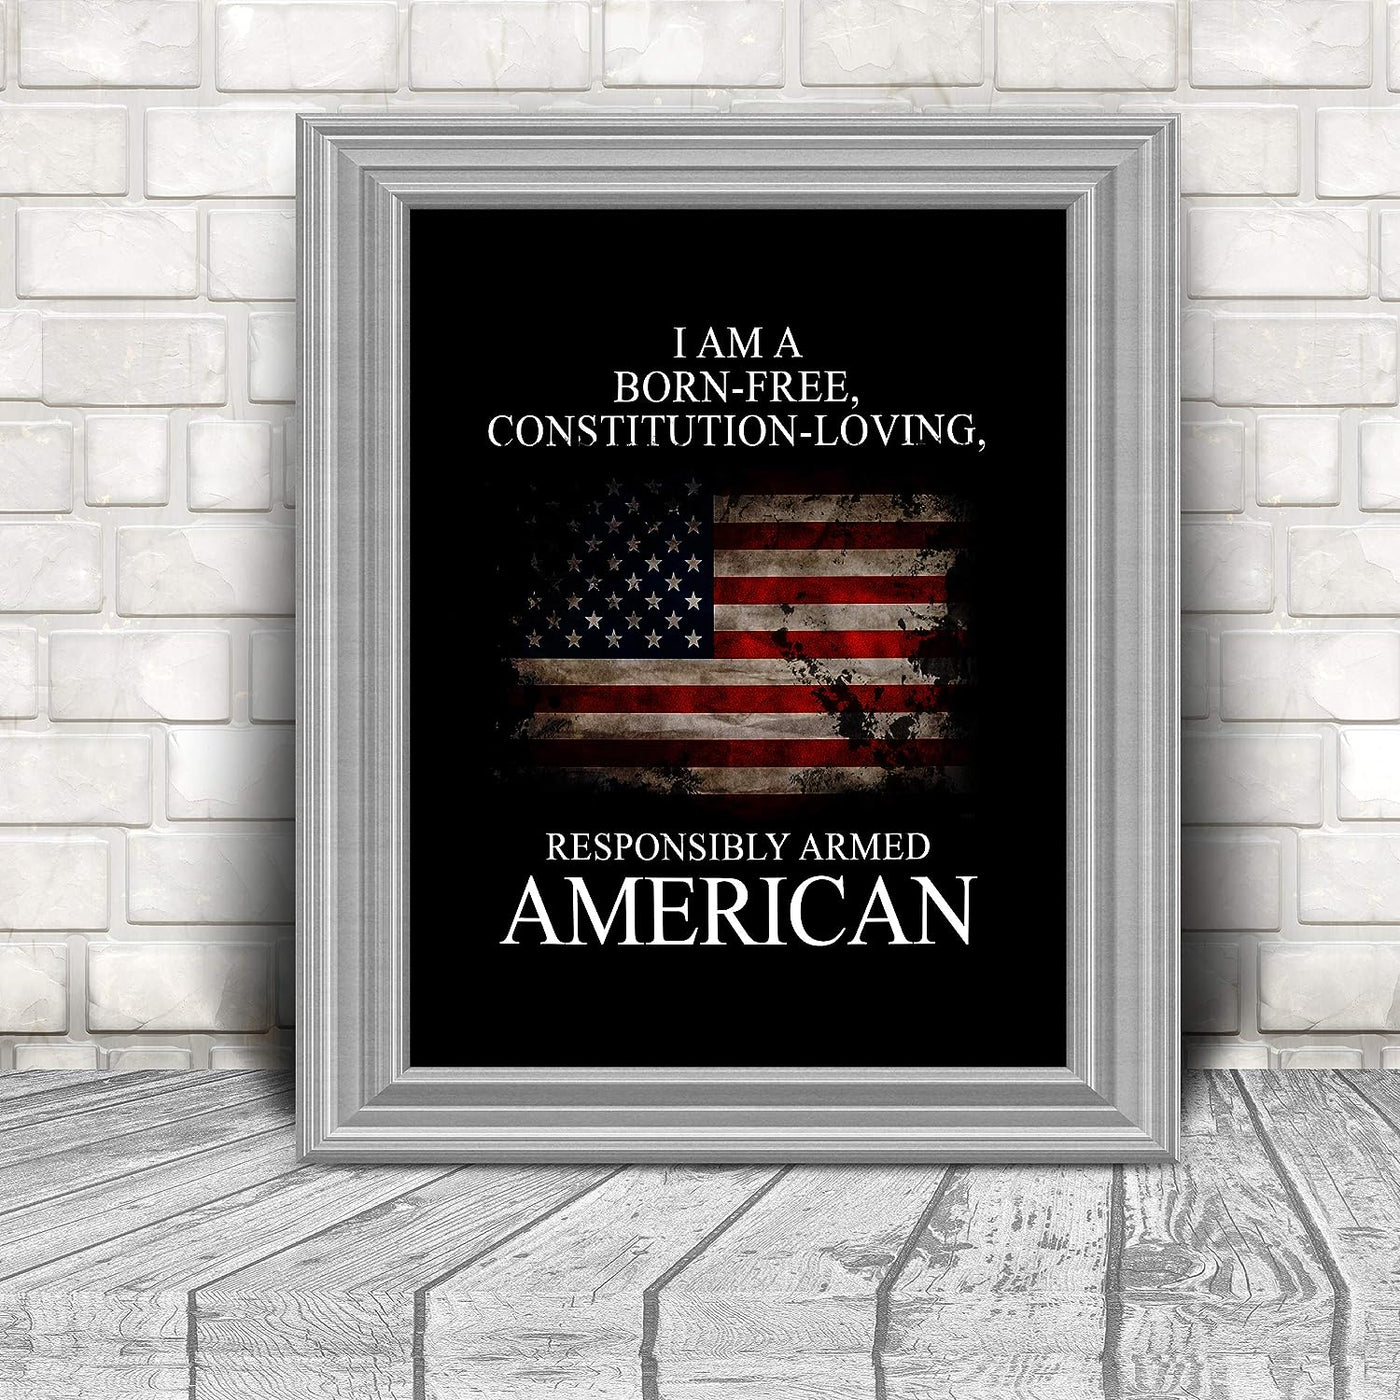 I Am A Born-Free, Responsibly Armed American-Patriotic Quotes Wall Art- 8 x 10" Pro-American Poster Print-Ready To Frame. Perfect Home-Office-Garage-Bar-Cave Decor. Display Your American Pride!